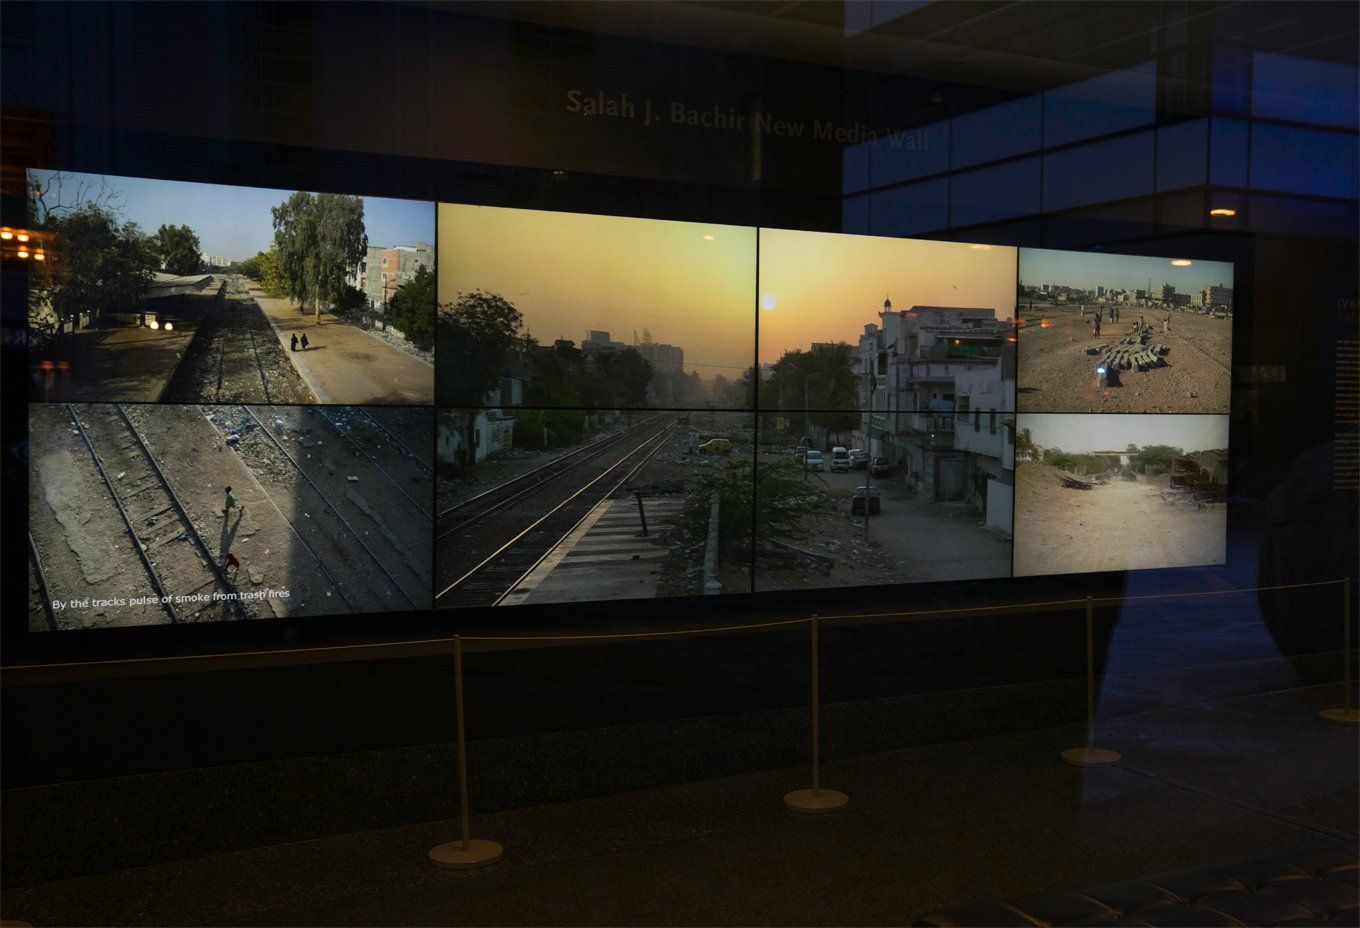 Ivan Sigal, installation of the multimedia documentary KCR at Ryerson Image Centre, Toronto. Image from placesjournal.org, 2018.